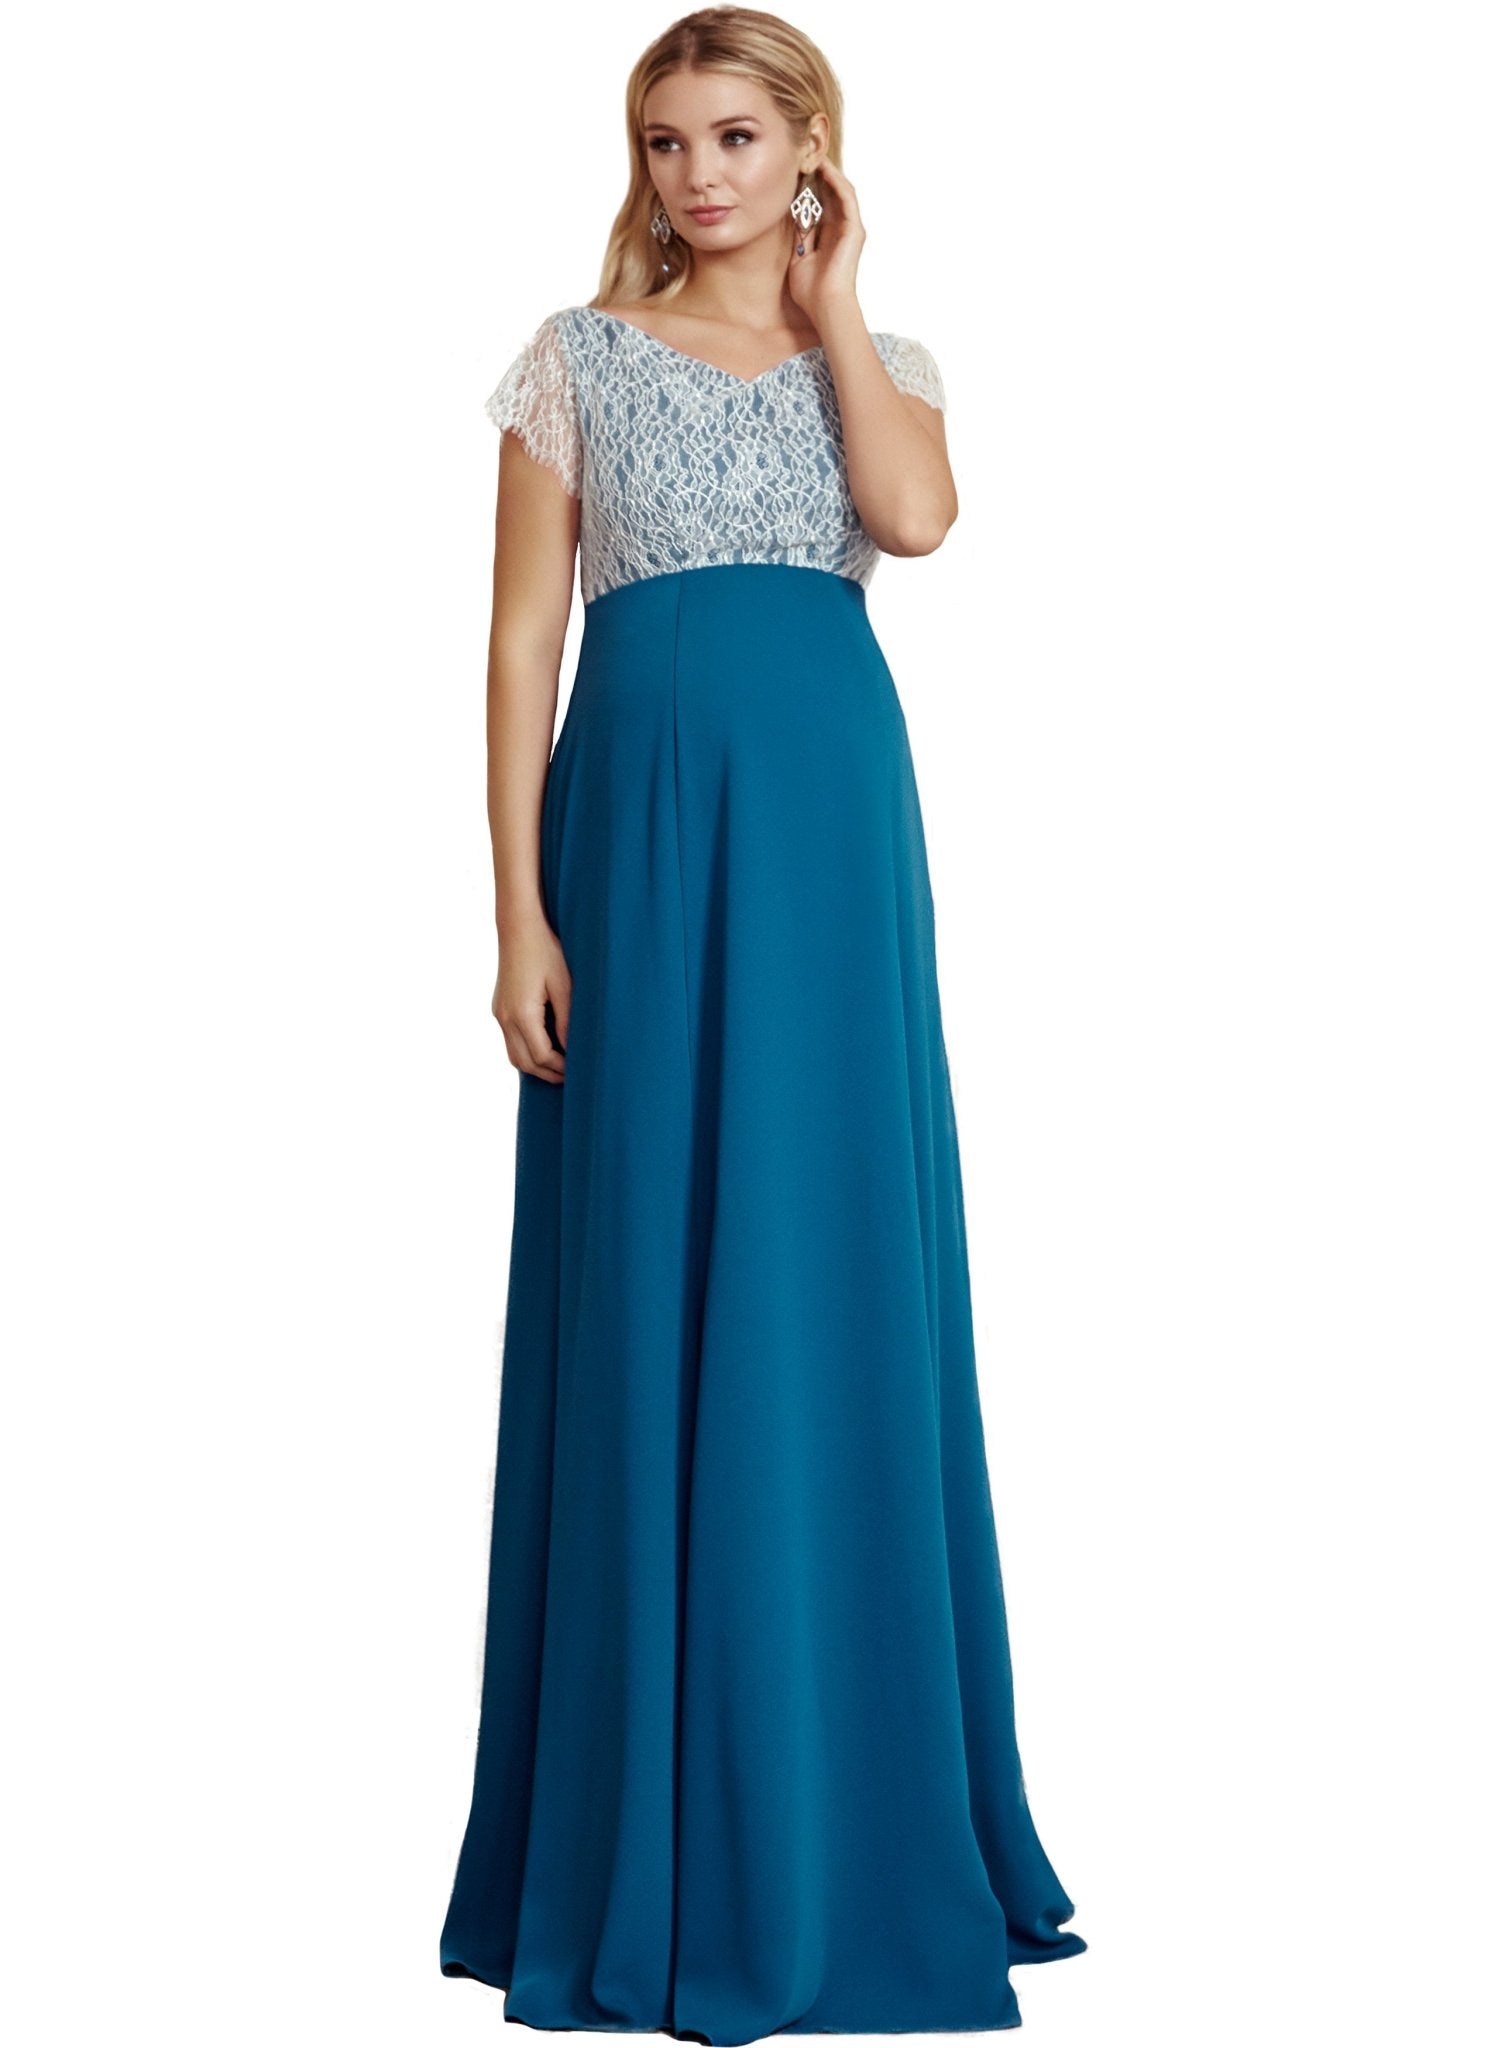 Eleanor Maternity Gown - Kingfisher - Mums and Bumps